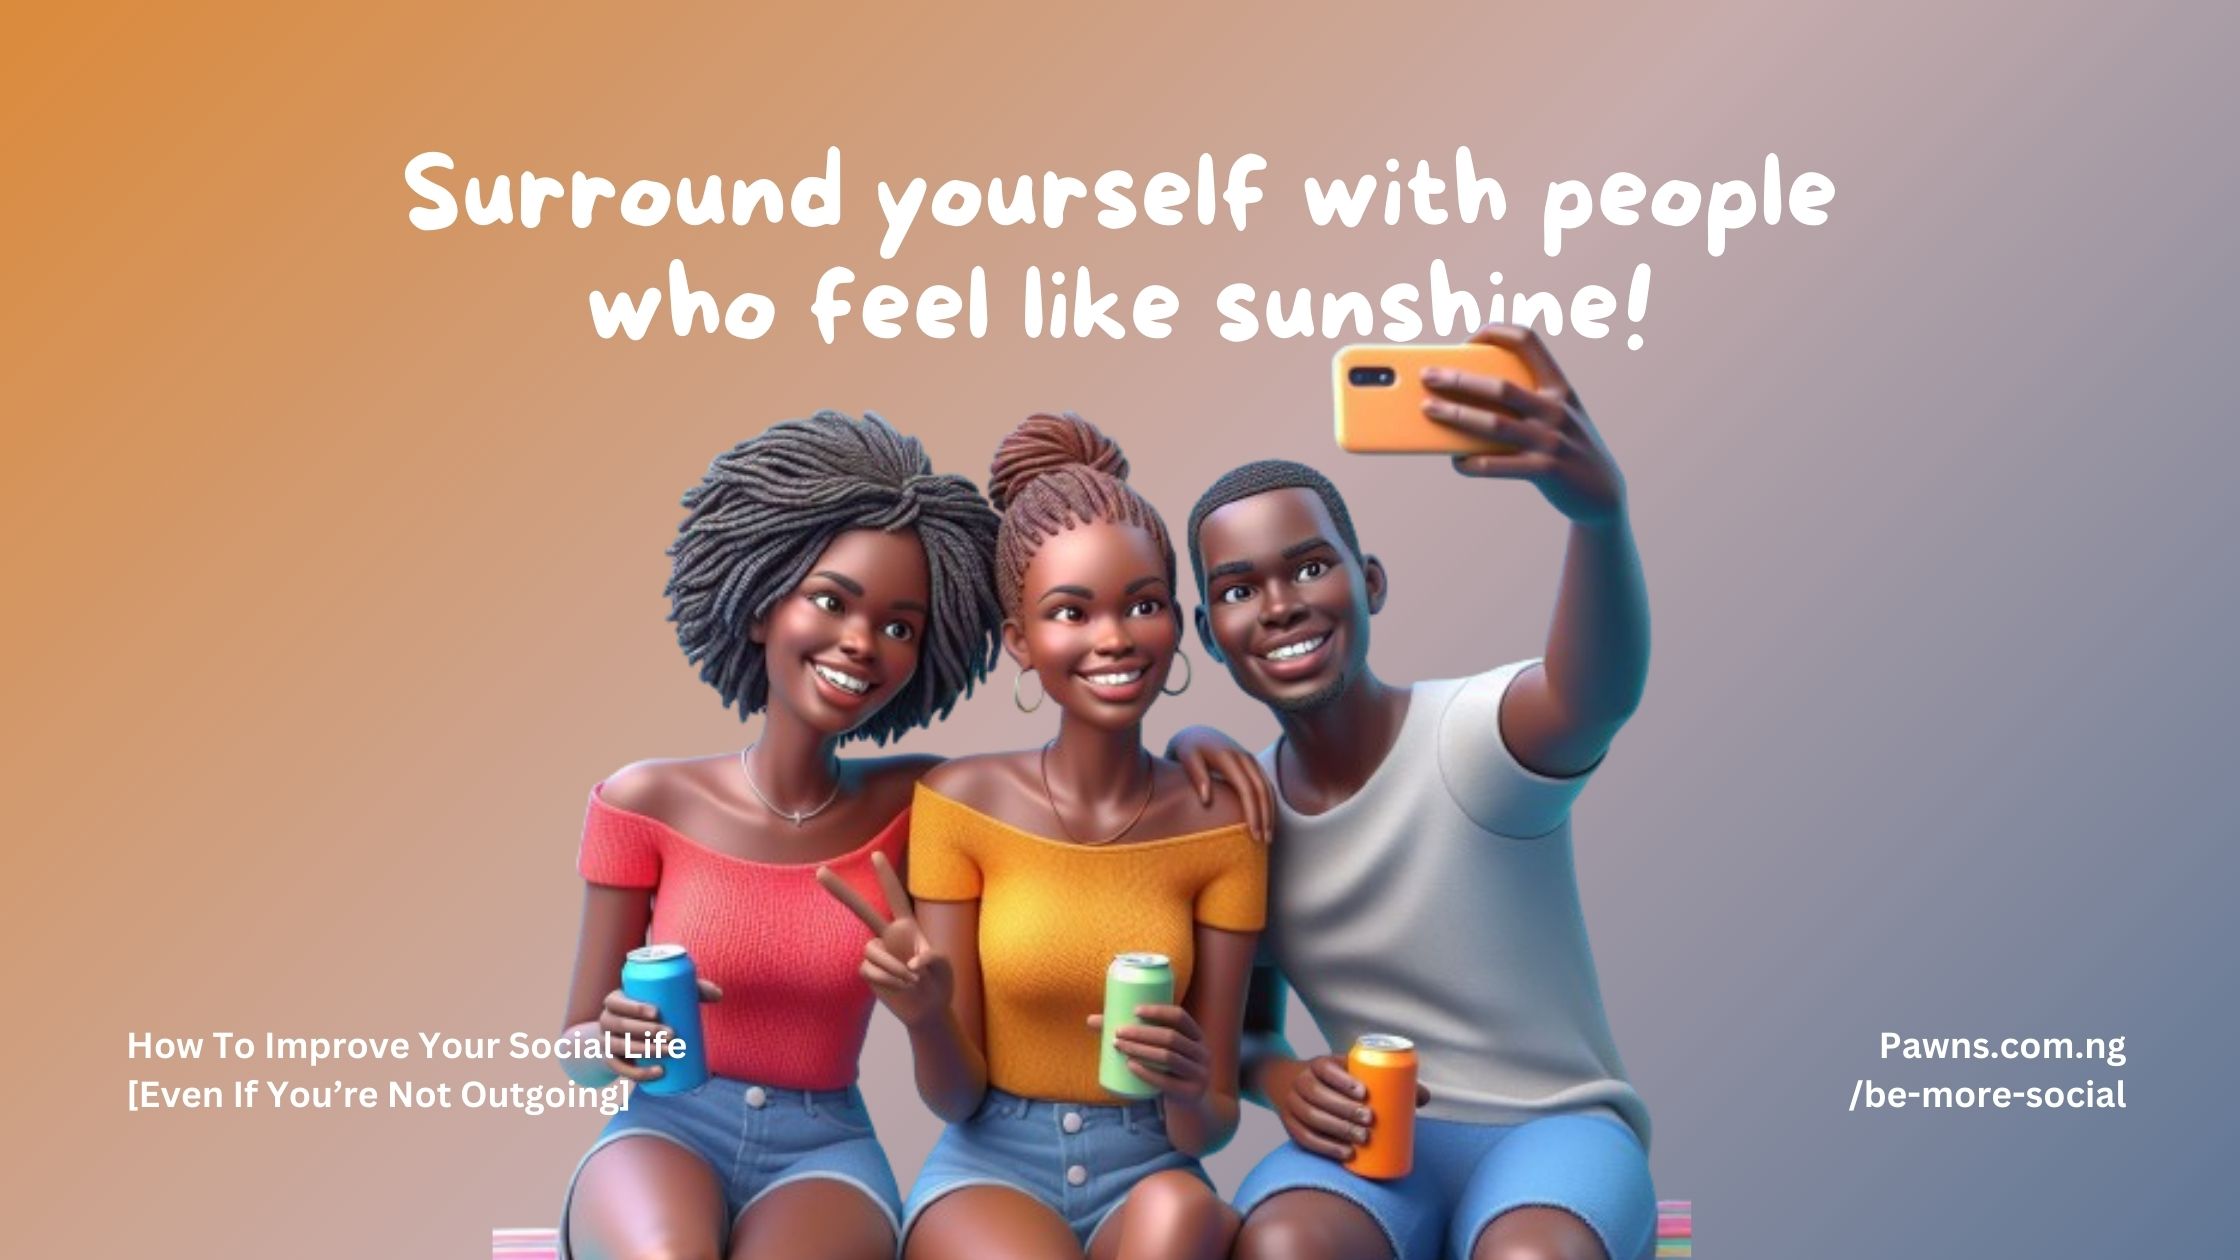 Surround yourself with people who feel like sunshine How To Improve Your Social Life Even If You’re Not Outgoing